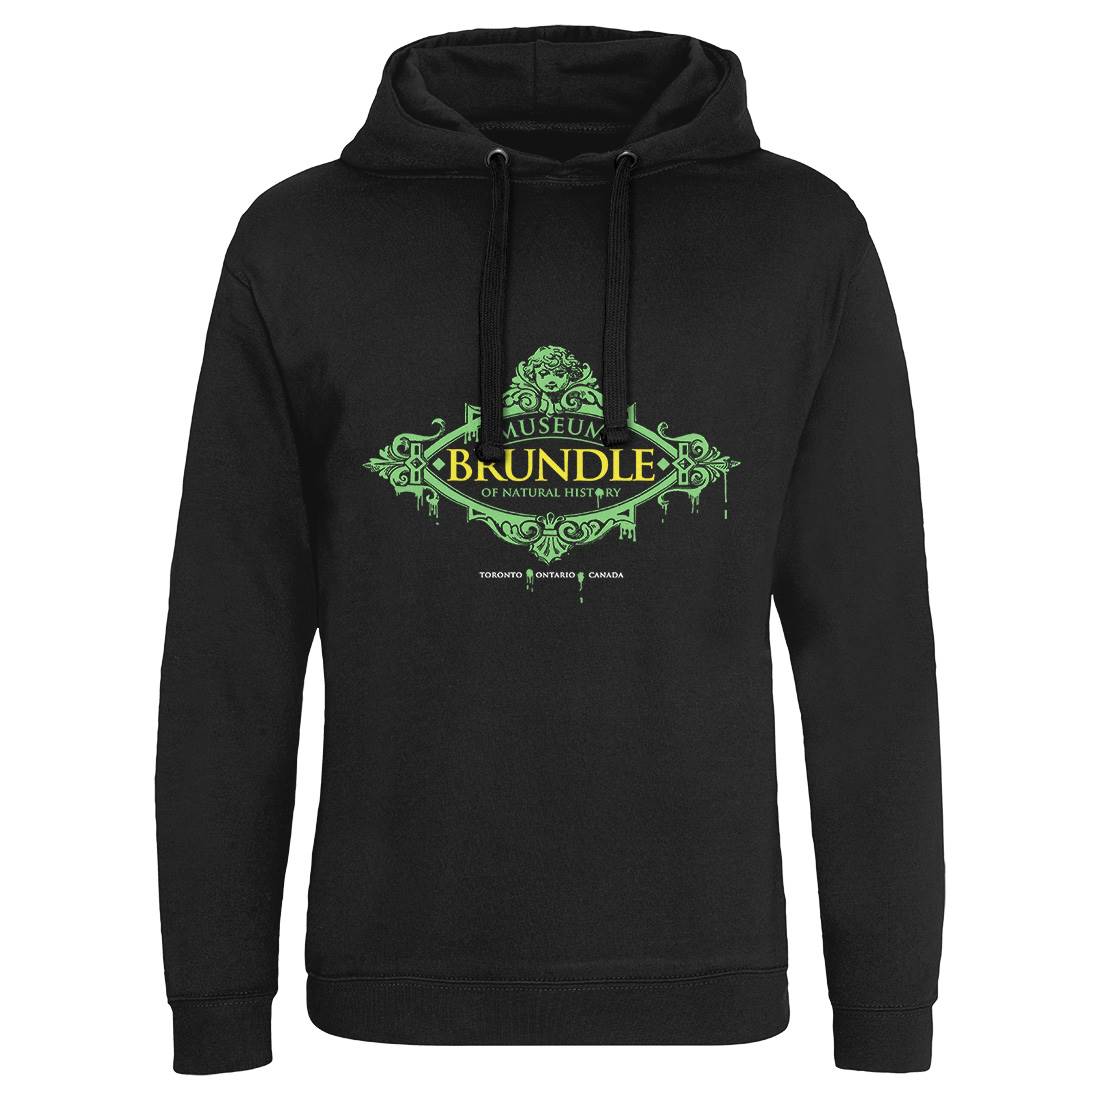 Brundle Museum Mens Hoodie Without Pocket Horror D288